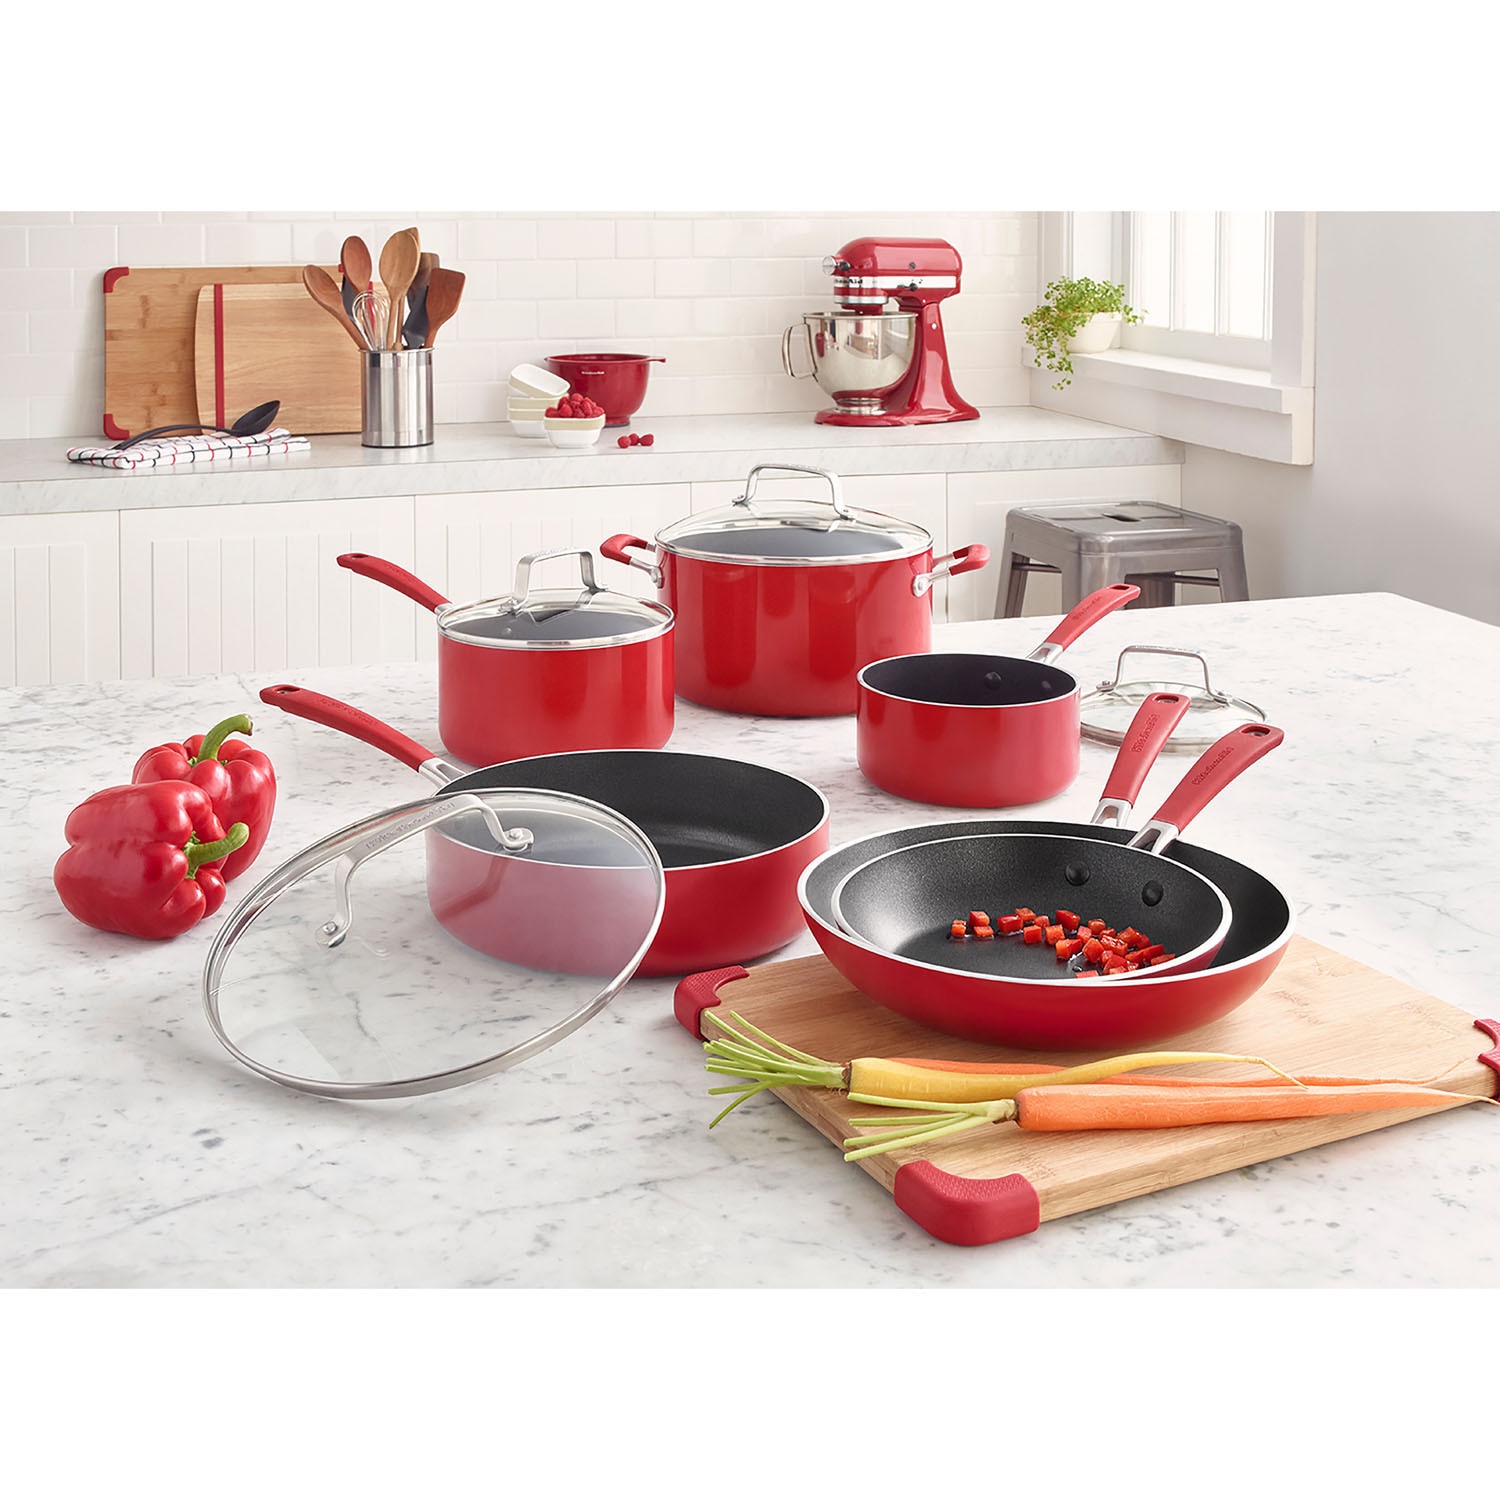 KitchenAid Stainless Steel Cookware Set, (14 pc.), Color: Only in Red or  Black